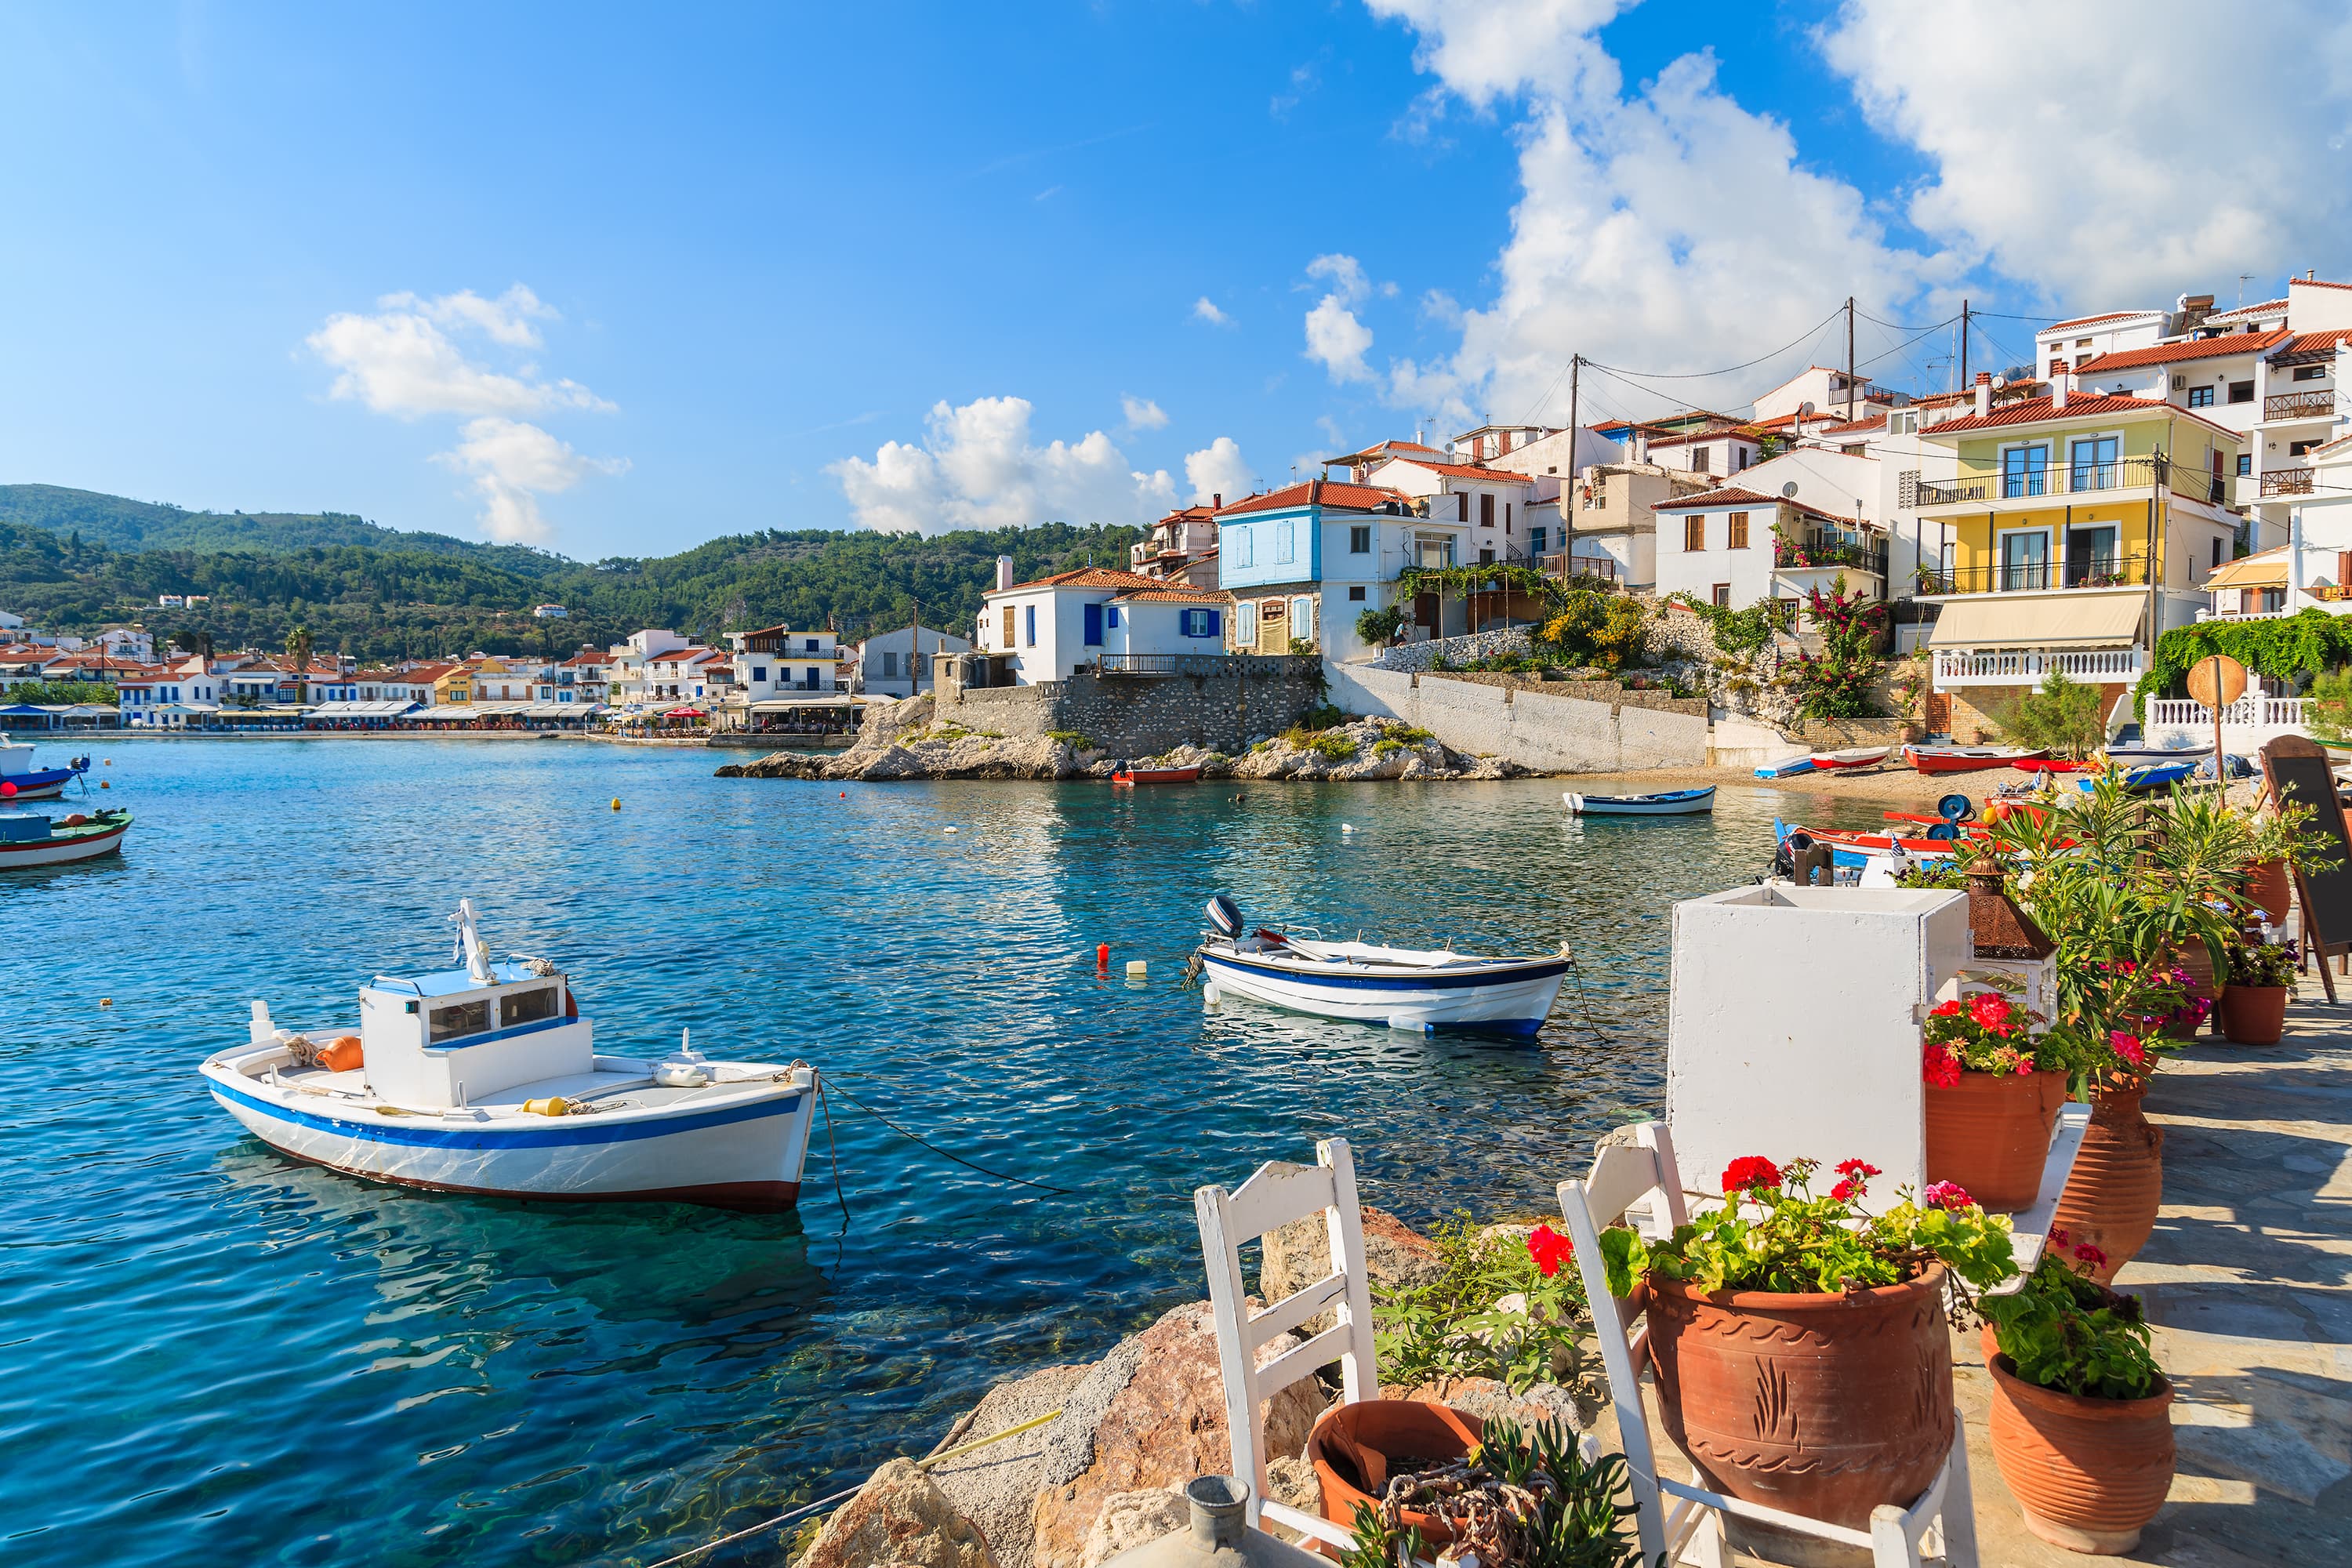 Spend July in Greece: SkyUp announces a round-trip ticket promotion